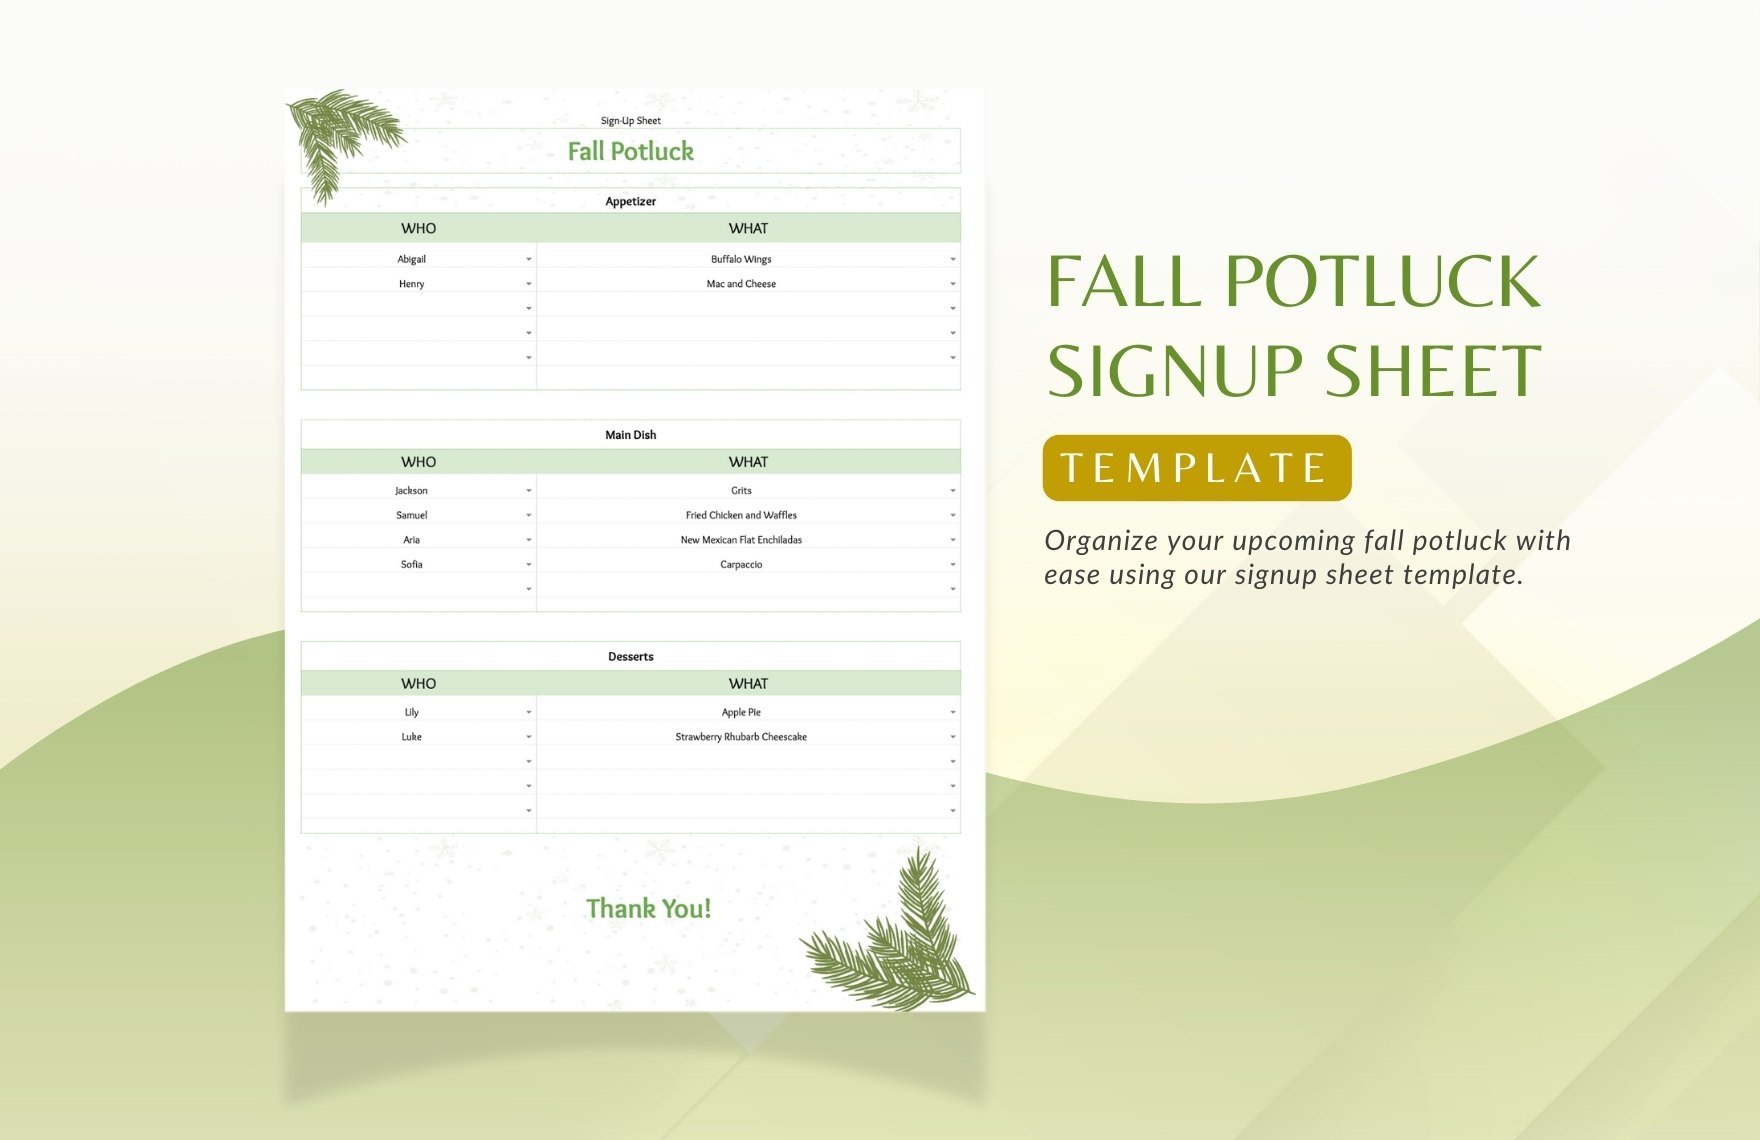 Fall Potluck Signup Sheet Template in Word, Google Docs, PDF, Google Sheets, Apple Pages